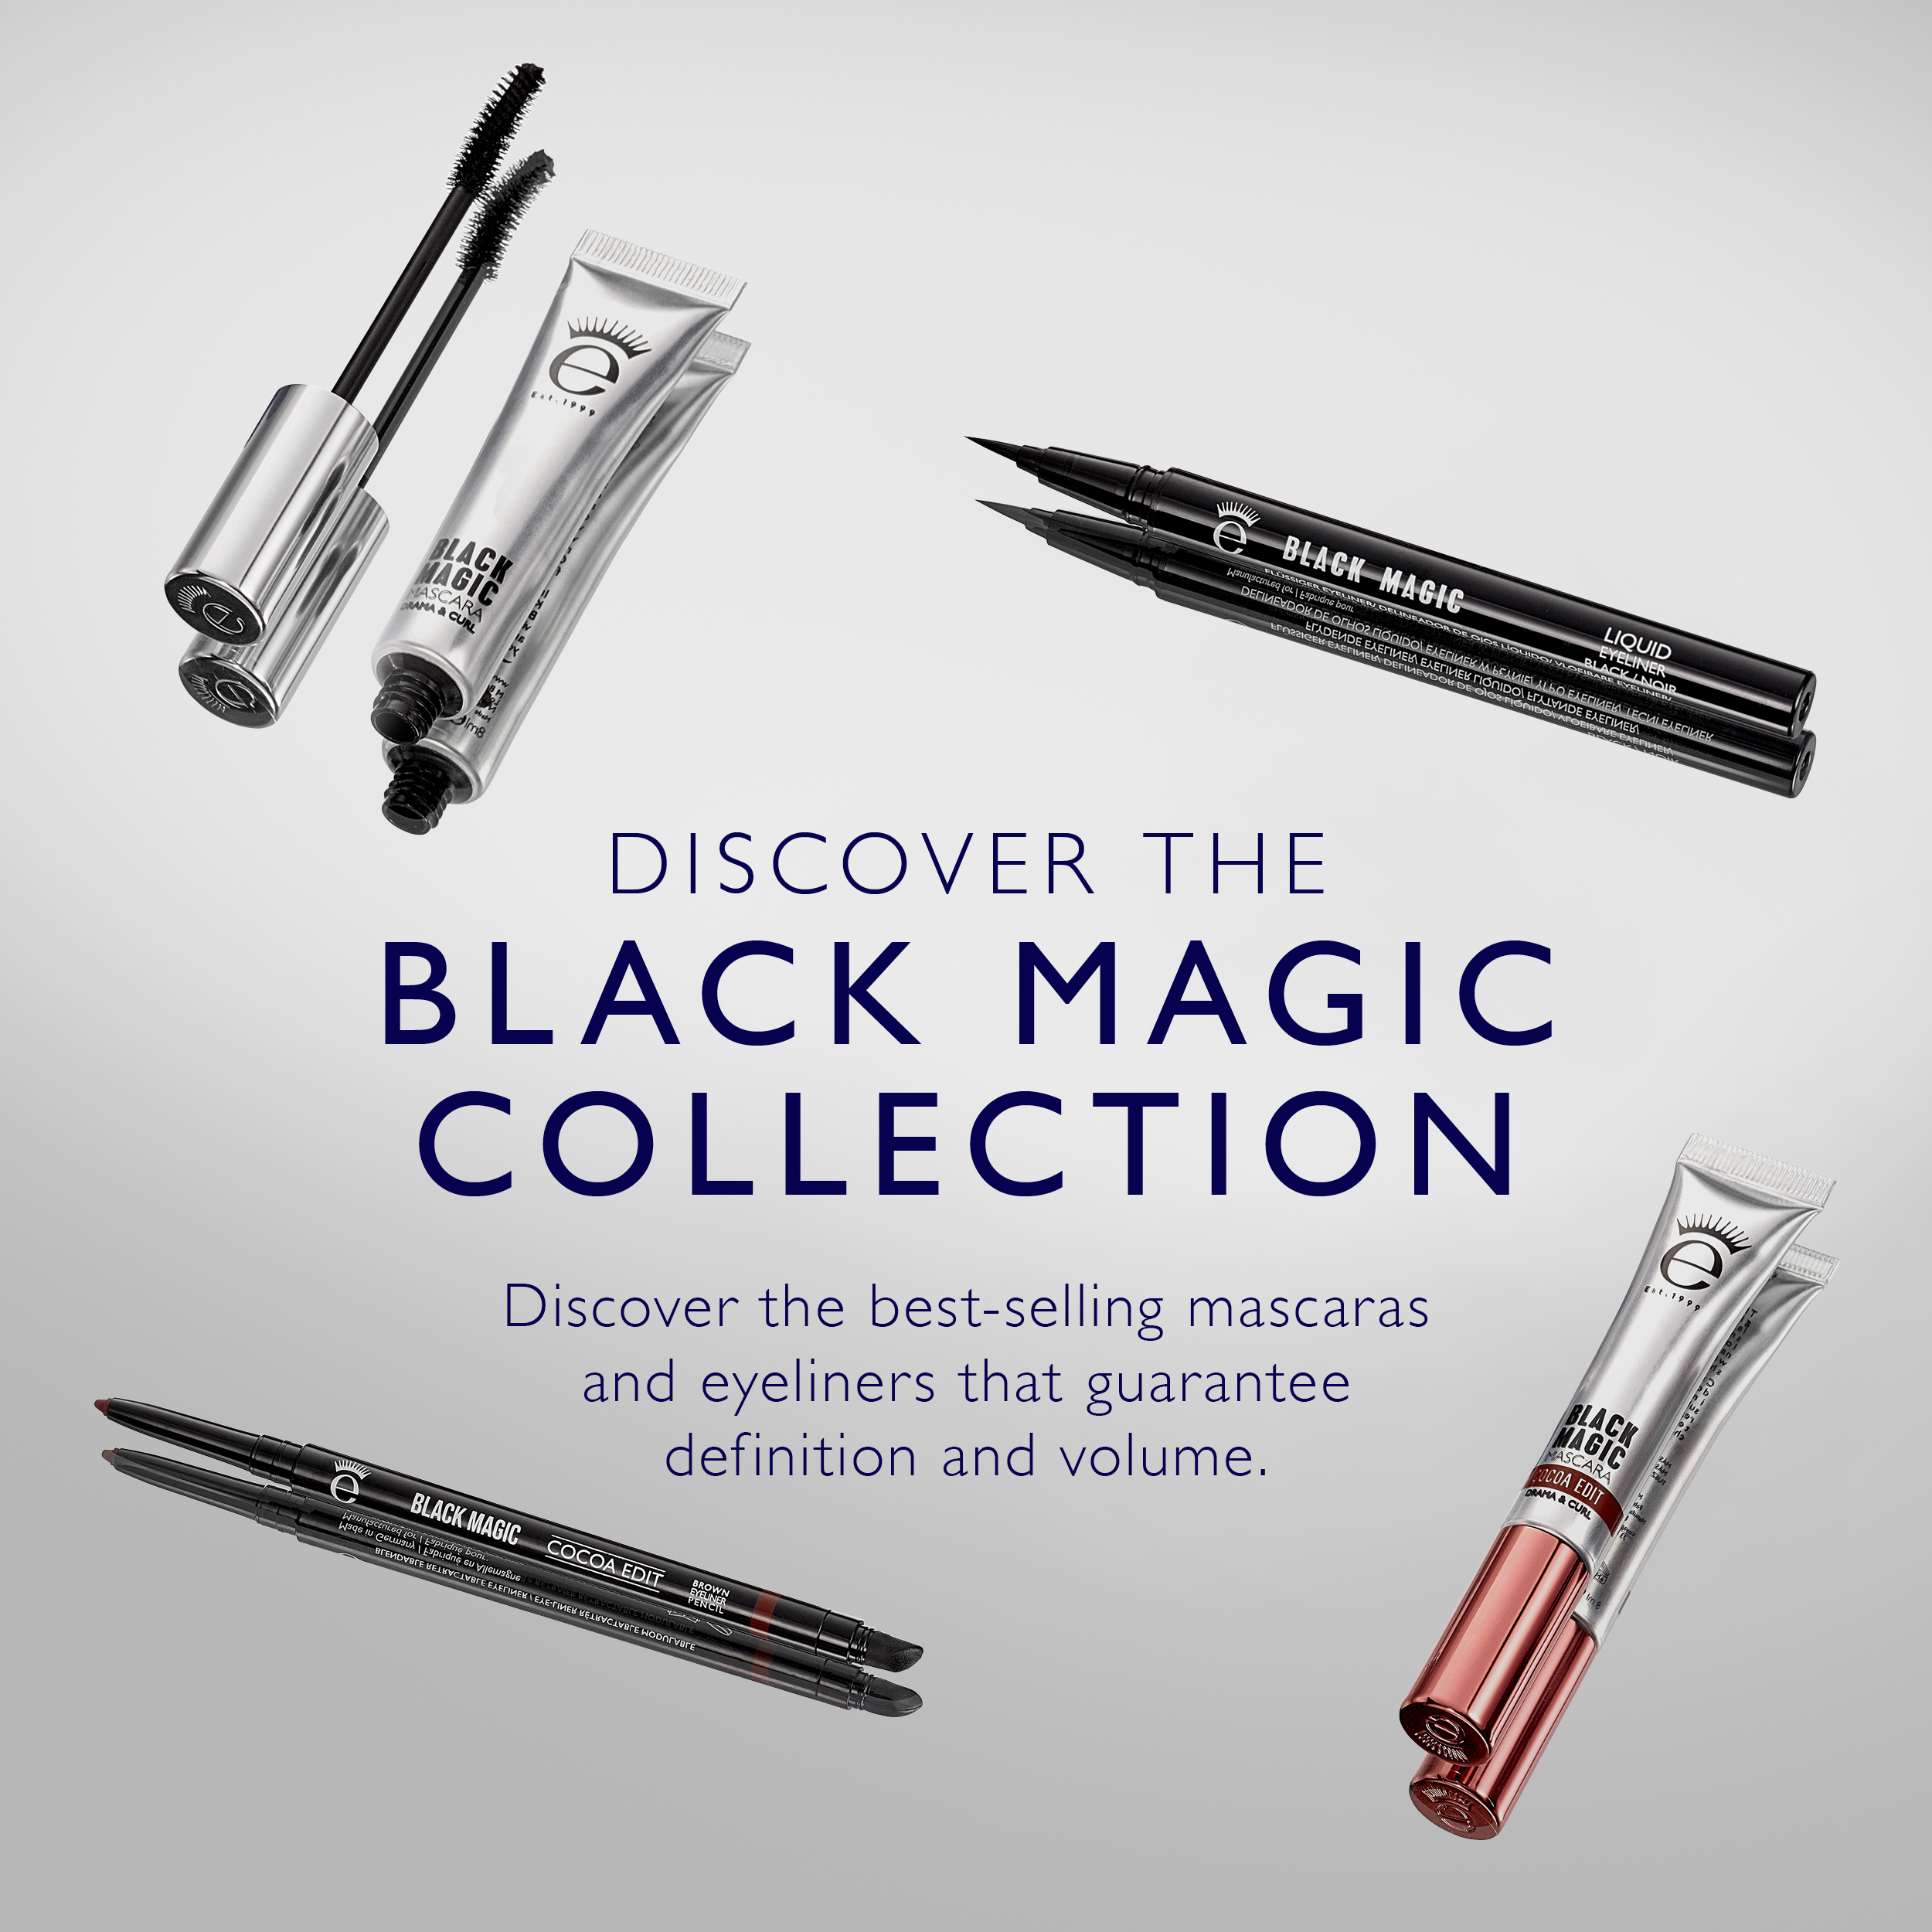 Discover the Black Magic Collection